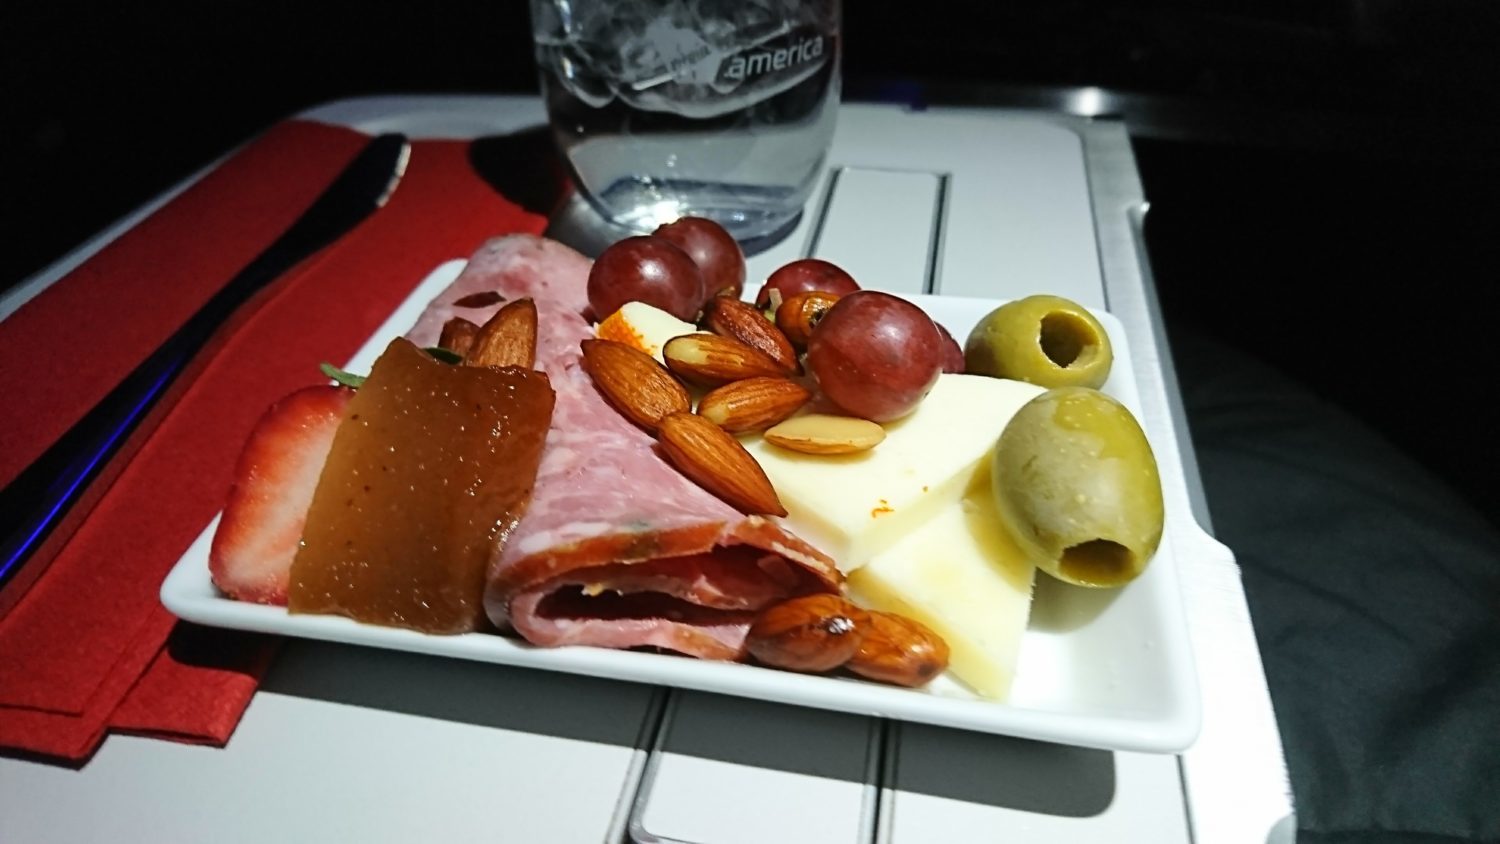 Meat and cheese snack in Virgin America First Class.